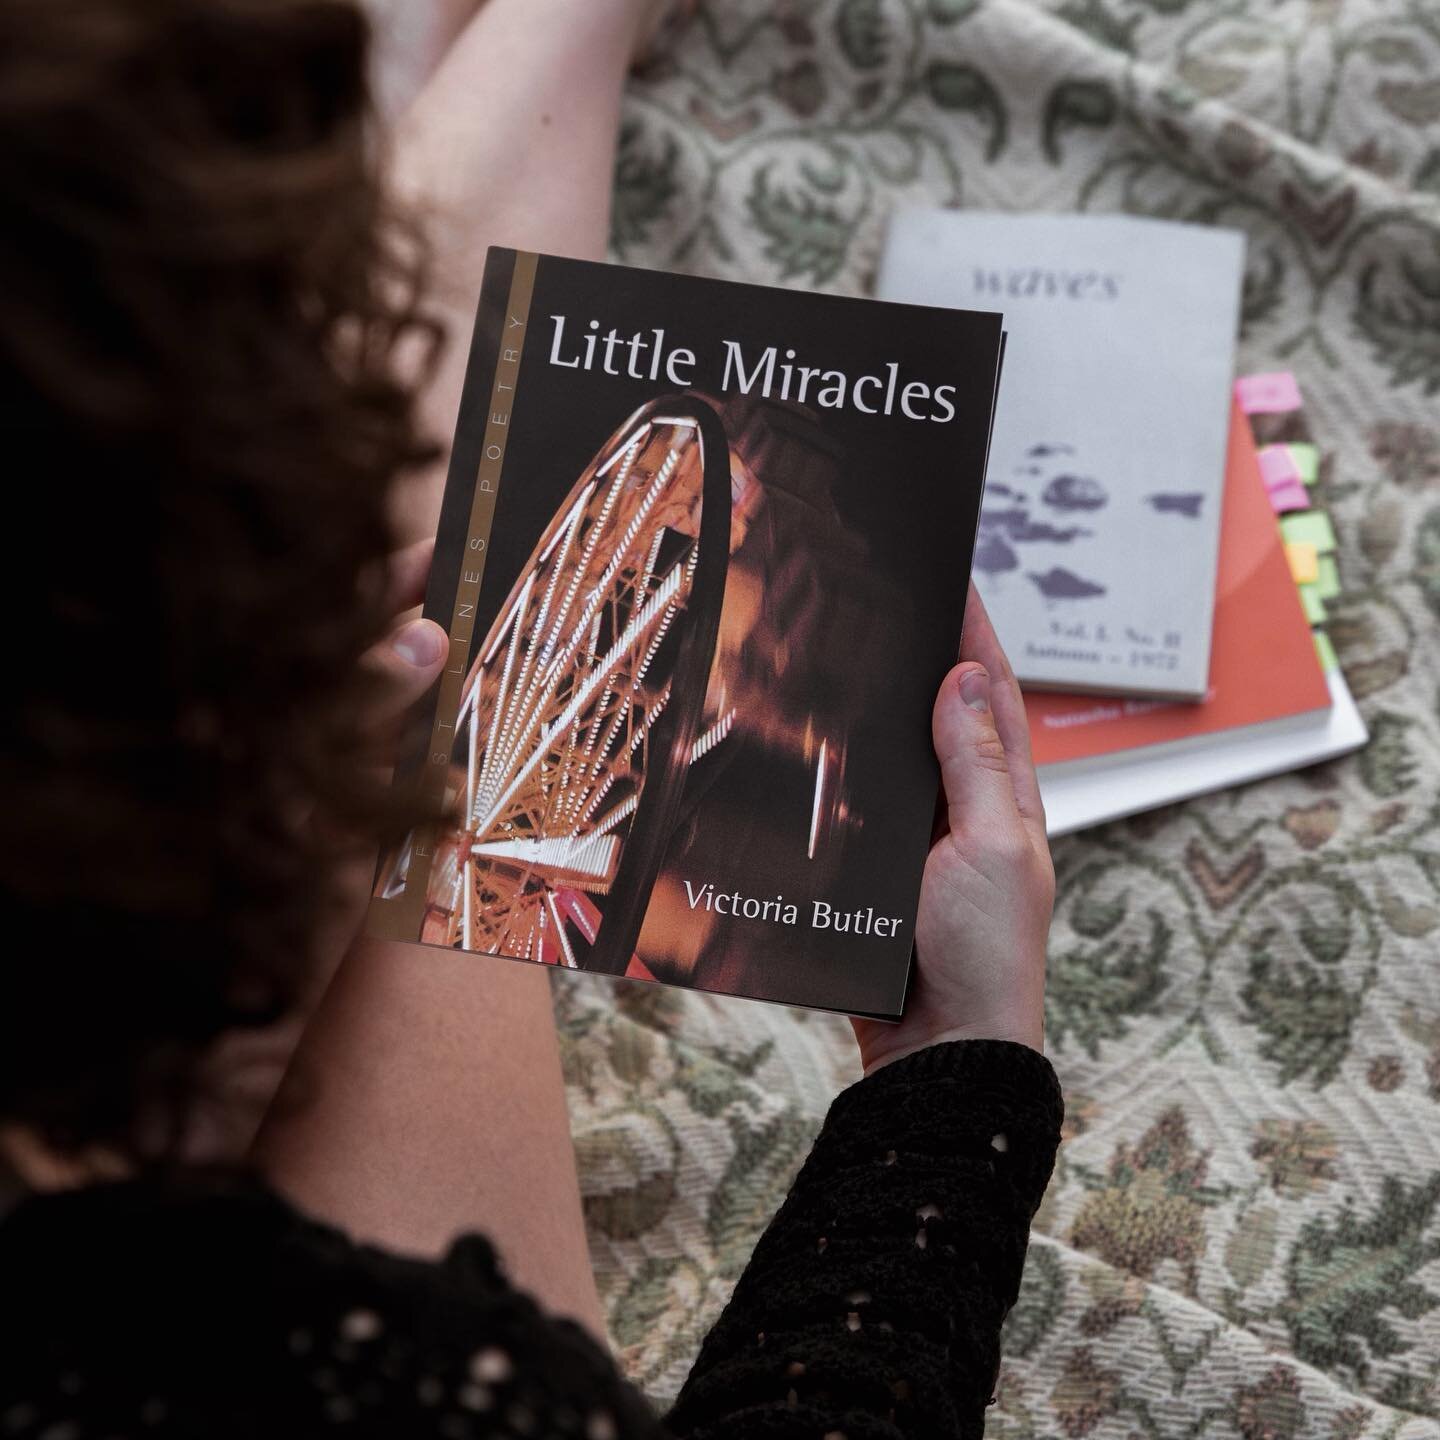 🤩IT&rsquo;S HERE 🤩

I&rsquo;m so excited to be able to share the cover for Little Miracles! I received my shipment of them on Monday and opening the box felt surreal. It&rsquo;s not ever day you get to hold your life long dream in your hands. The c